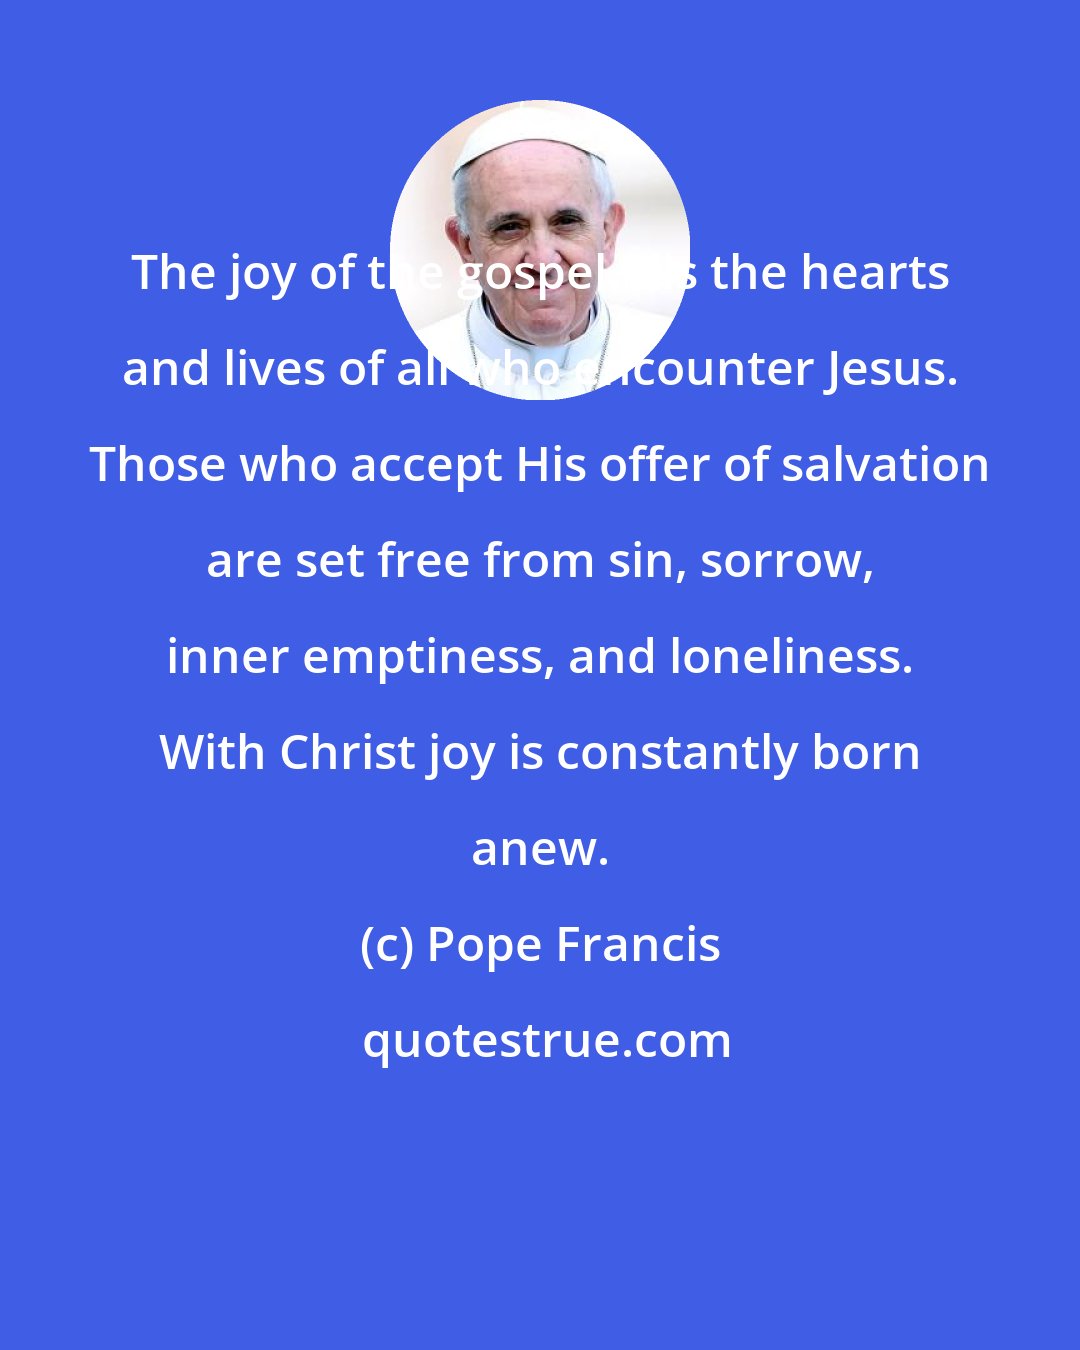 Pope Francis: The joy of the gospel fills the hearts and lives of all who encounter Jesus. Those who accept His offer of salvation are set free from sin, sorrow, inner emptiness, and loneliness. With Christ joy is constantly born anew.